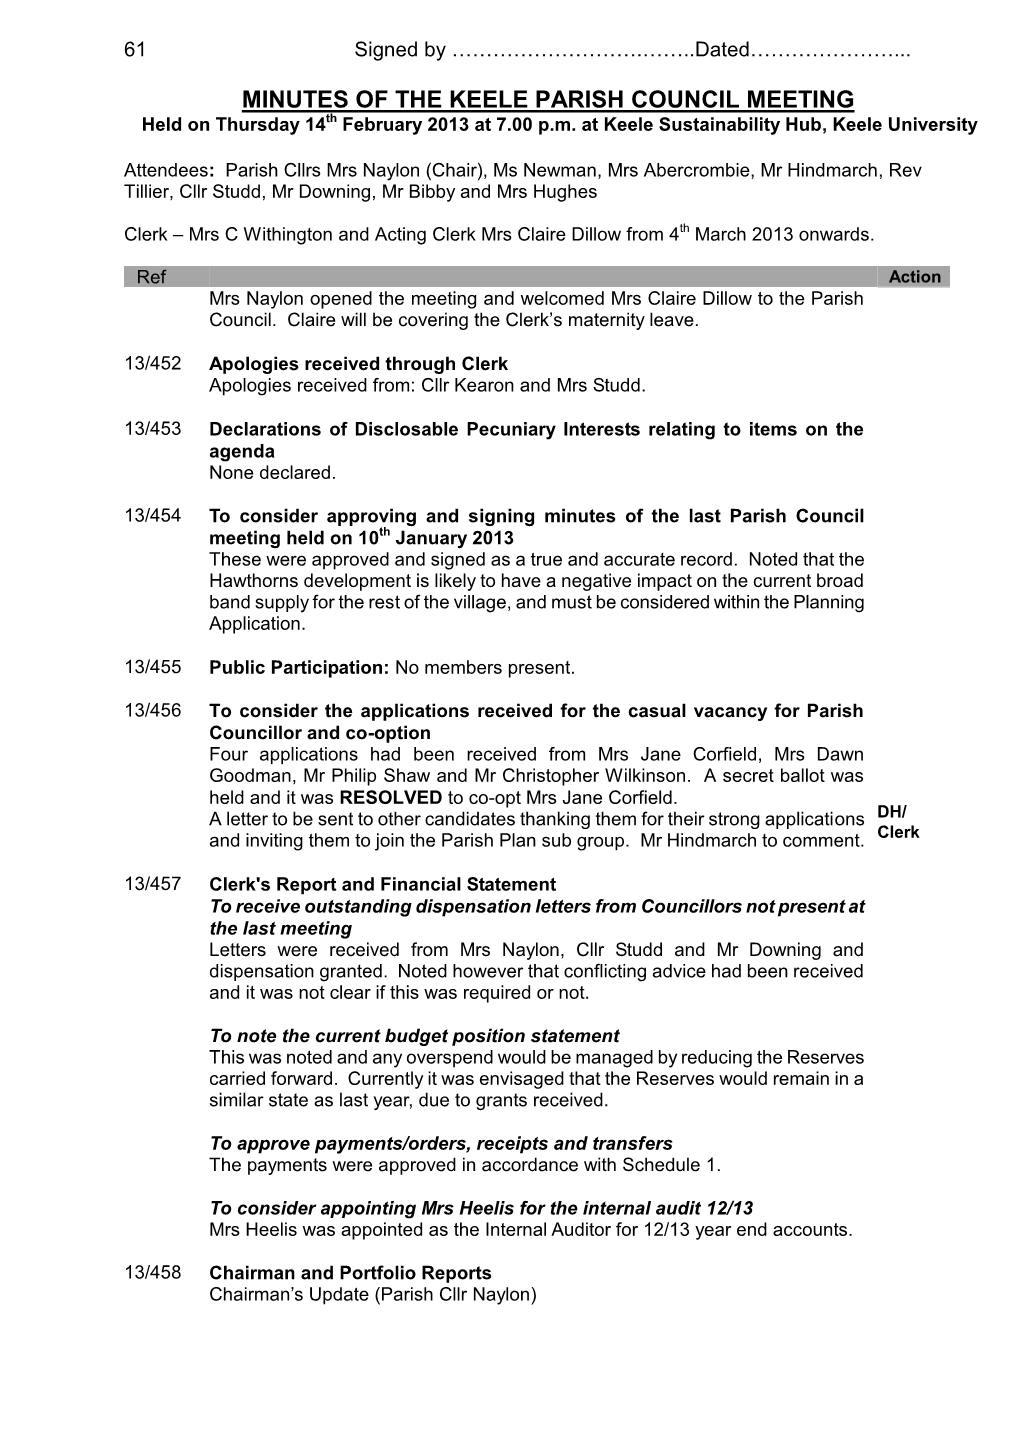 MINUTES of the KEELE PARISH COUNCIL MEETING Held on Thursday 14Th February 2013 at 7.00 P.M